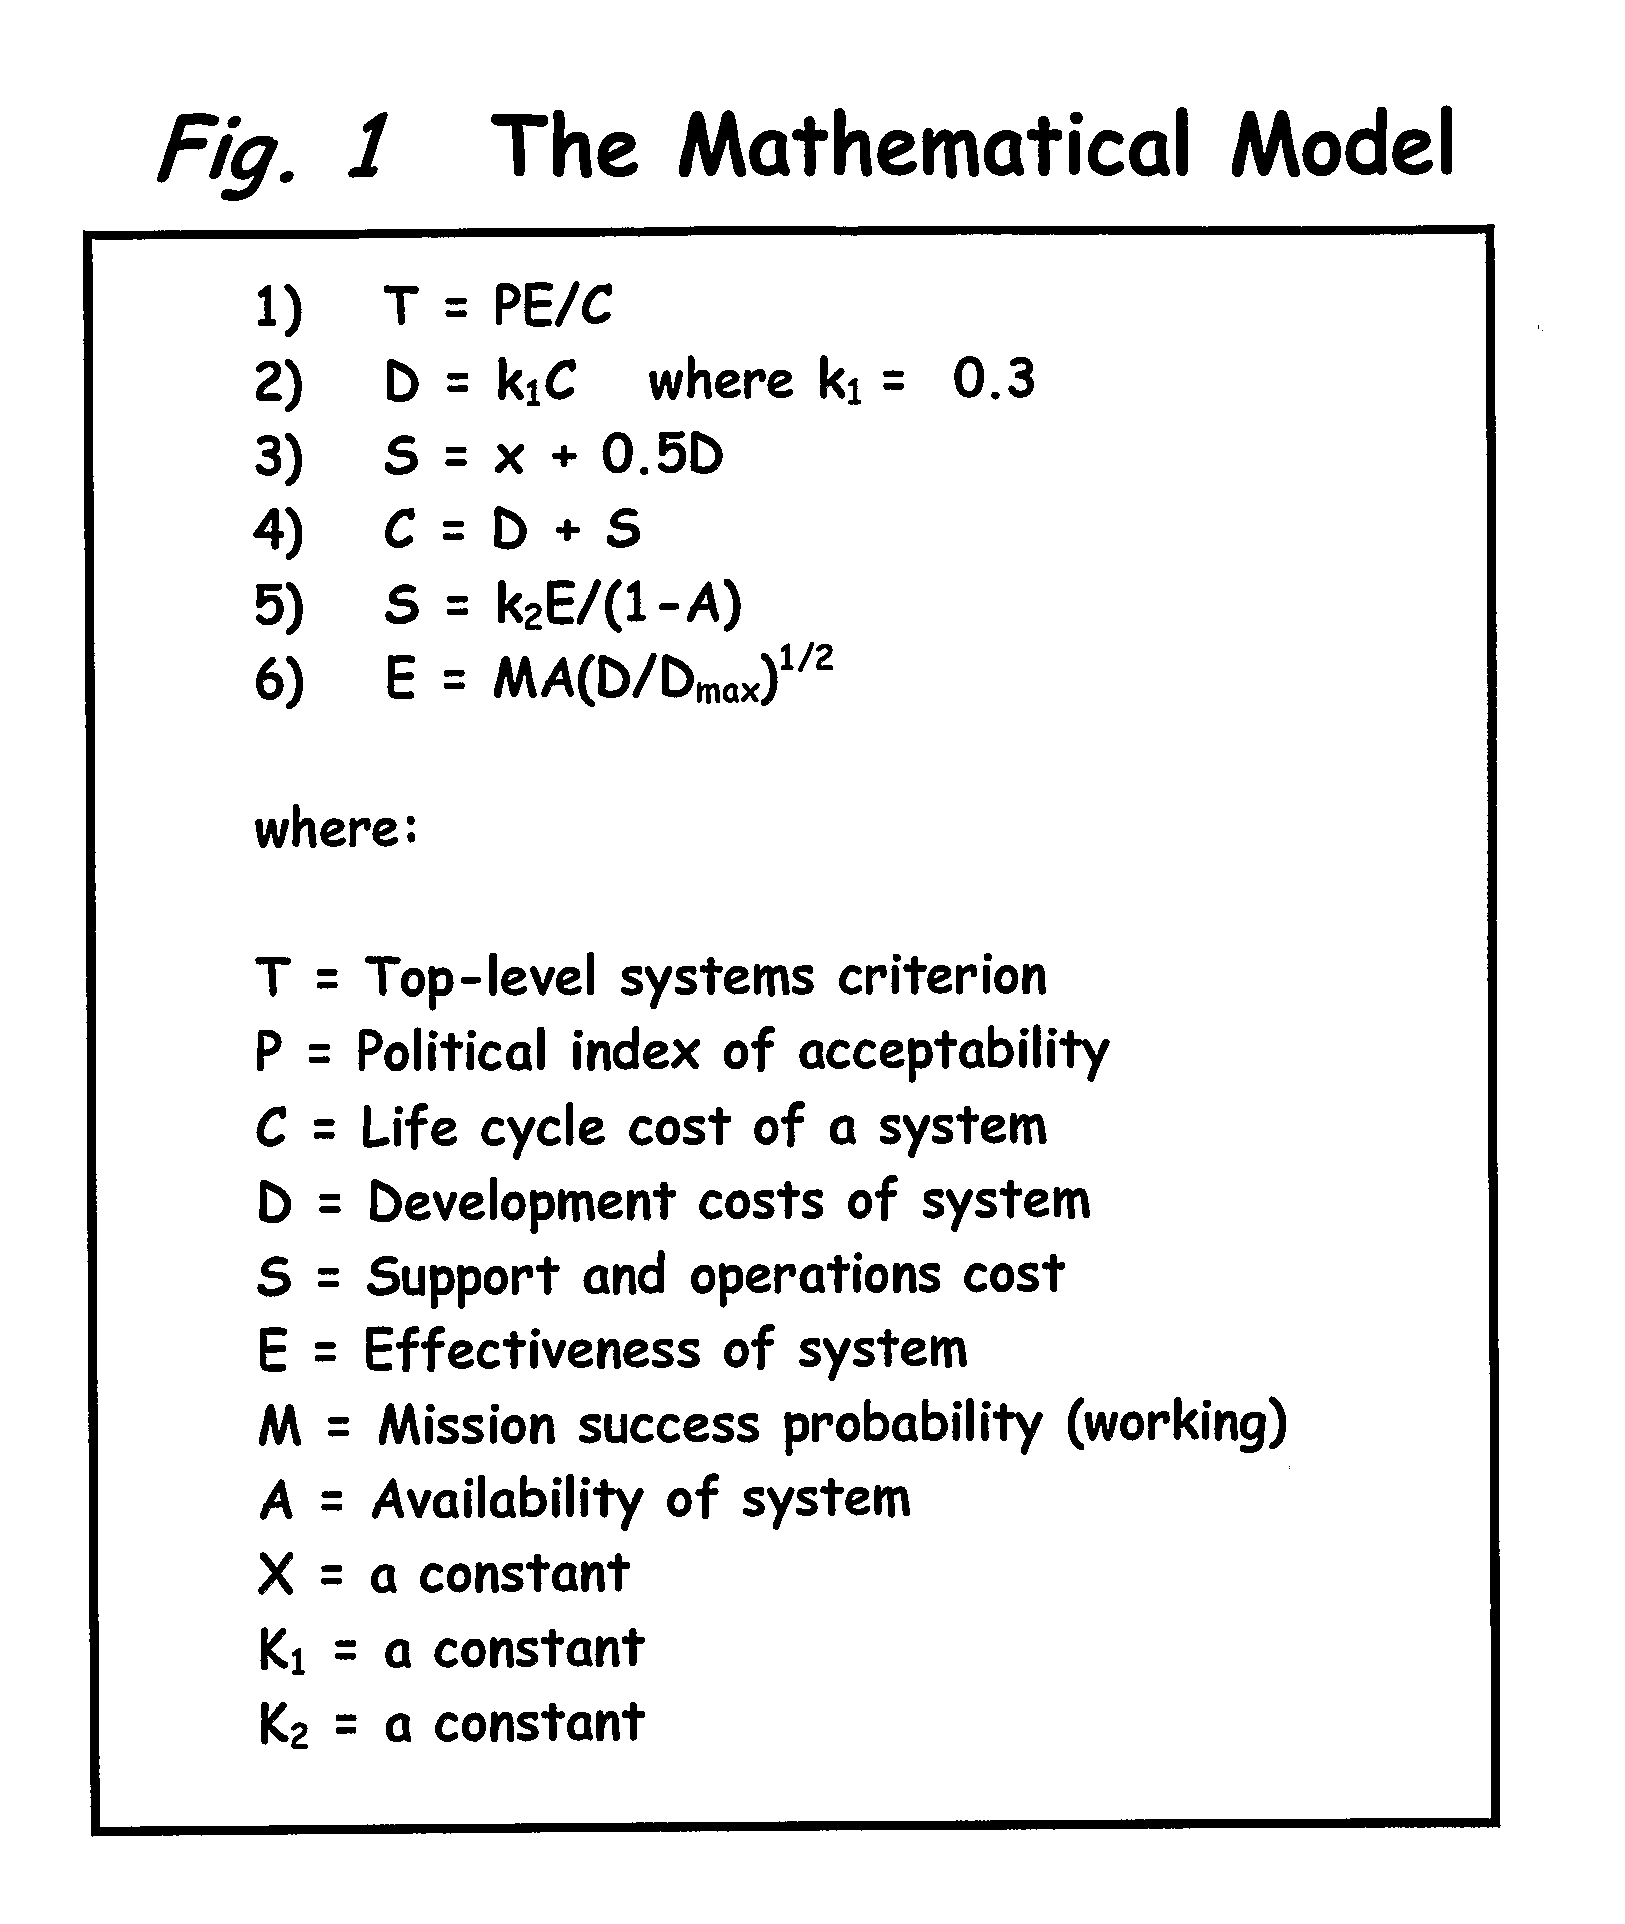 Computer Program Product & Computer with Program to Execute a Well-Posed Mathematical Method